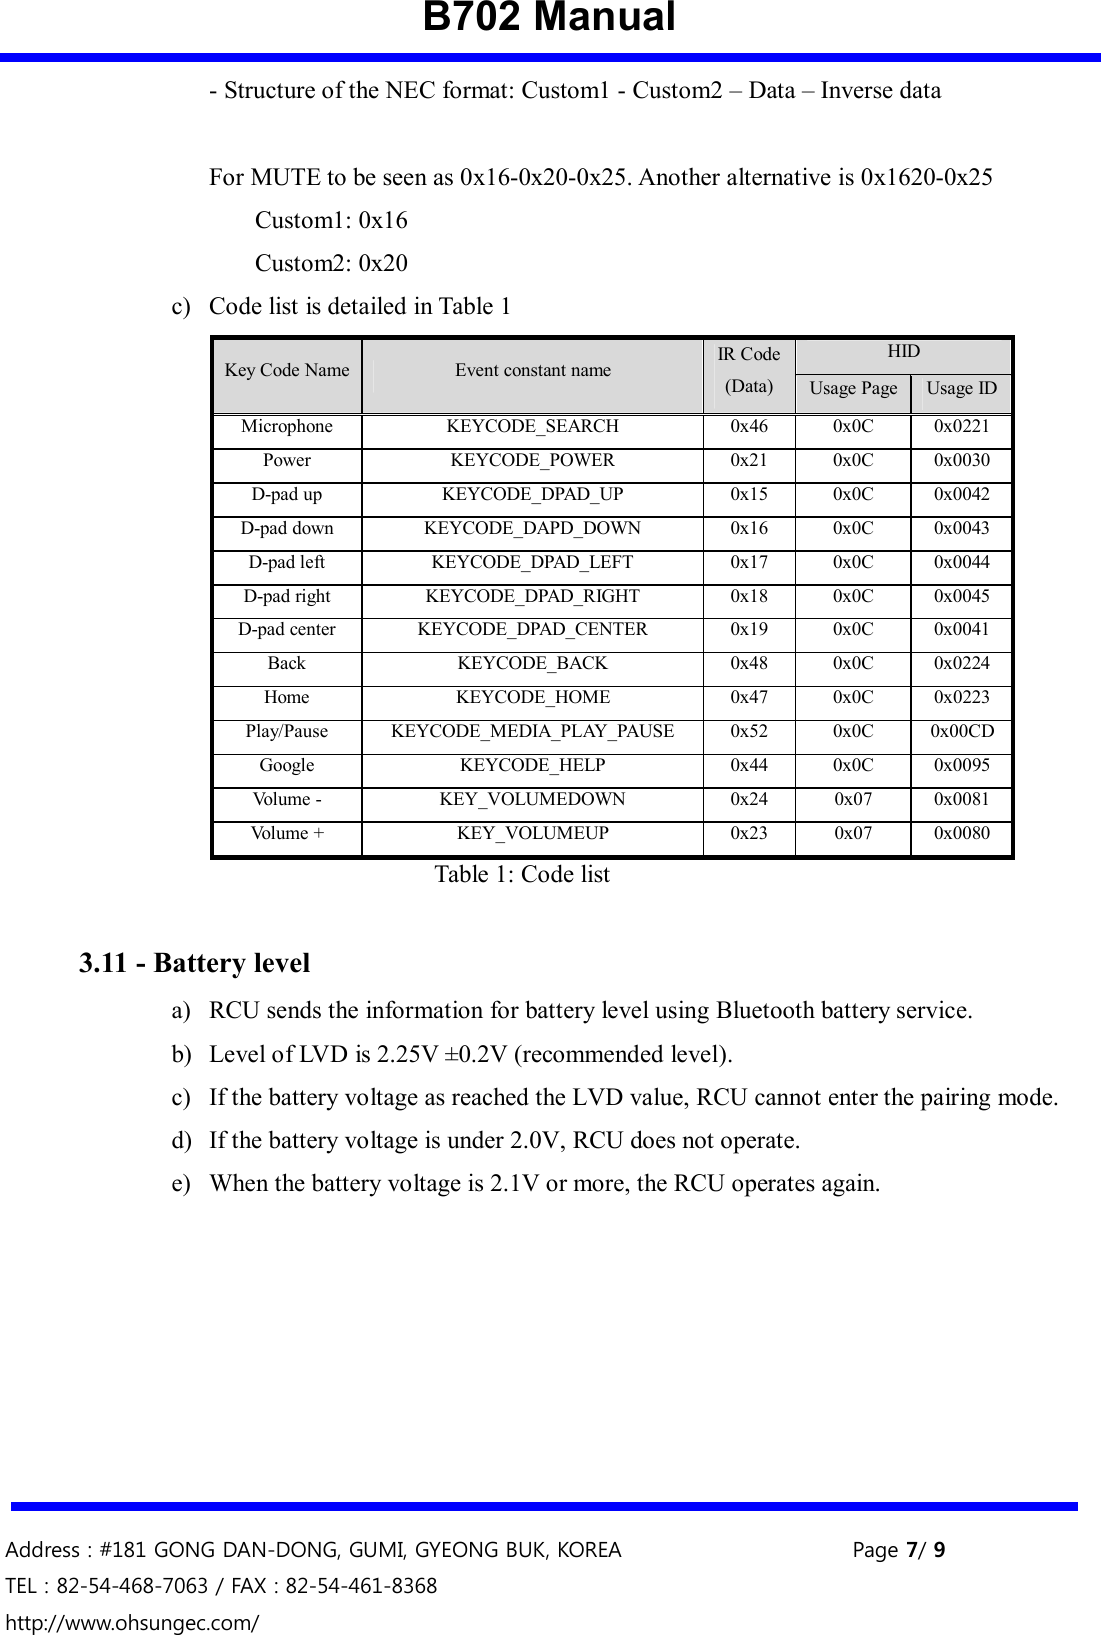 B702 Manual   Address : #181 GONG DAN-DONG, GUMI, GYEONG BUK, KOREA    Page 7/ 9 TEL : 82-54-468-7063 / FAX : 82-54-461-8368 http://www.ohsungec.com/  - Structure of the NEC format: Custom1 - Custom2 – Data – Inverse data    For MUTE to be seen as 0x16-0x20-0x25. Another alternative is 0x1620-0x25   Custom1: 0x16   Custom2: 0x20 c) Code list is detailed in Table 1 Key Code Name Event constant name  IR Code (Data) HID Usage Page Usage ID Microphone KEYCODE_SEARCH 0x46 0x0C 0x0221 Power KEYCODE_POWER 0x21 0x0C 0x0030 D-pad up KEYCODE_DPAD_UP 0x15 0x0C 0x0042 D-pad down KEYCODE_DAPD_DOWN 0x16 0x0C 0x0043 D-pad left KEYCODE_DPAD_LEFT 0x17 0x0C 0x0044 D-pad right KEYCODE_DPAD_RIGHT 0x18 0x0C 0x0045 D-pad center KEYCODE_DPAD_CENTER 0x19 0x0C 0x0041 Back KEYCODE_BACK 0x48 0x0C 0x0224 Home KEYCODE_HOME 0x47 0x0C 0x0223 Play/Pause KEYCODE_MEDIA_PLAY_PAUSE 0x52 0x0C 0x00CD Google KEYCODE_HELP 0x44 0x0C 0x0095 Volume - KEY_VOLUMEDOWN 0x24 0x07 0x0081 Volume + KEY_VOLUMEUP 0x23 0x07 0x0080 Table 1: Code list  3.11 - Battery level a) RCU sends the information for battery level using Bluetooth battery service. b) Level of LVD is 2.25V ±0.2V (recommended level). c) If the battery voltage as reached the LVD value, RCU cannot enter the pairing mode. d) If the battery voltage is under 2.0V, RCU does not operate. e) When the battery voltage is 2.1V or more, the RCU operates again.      